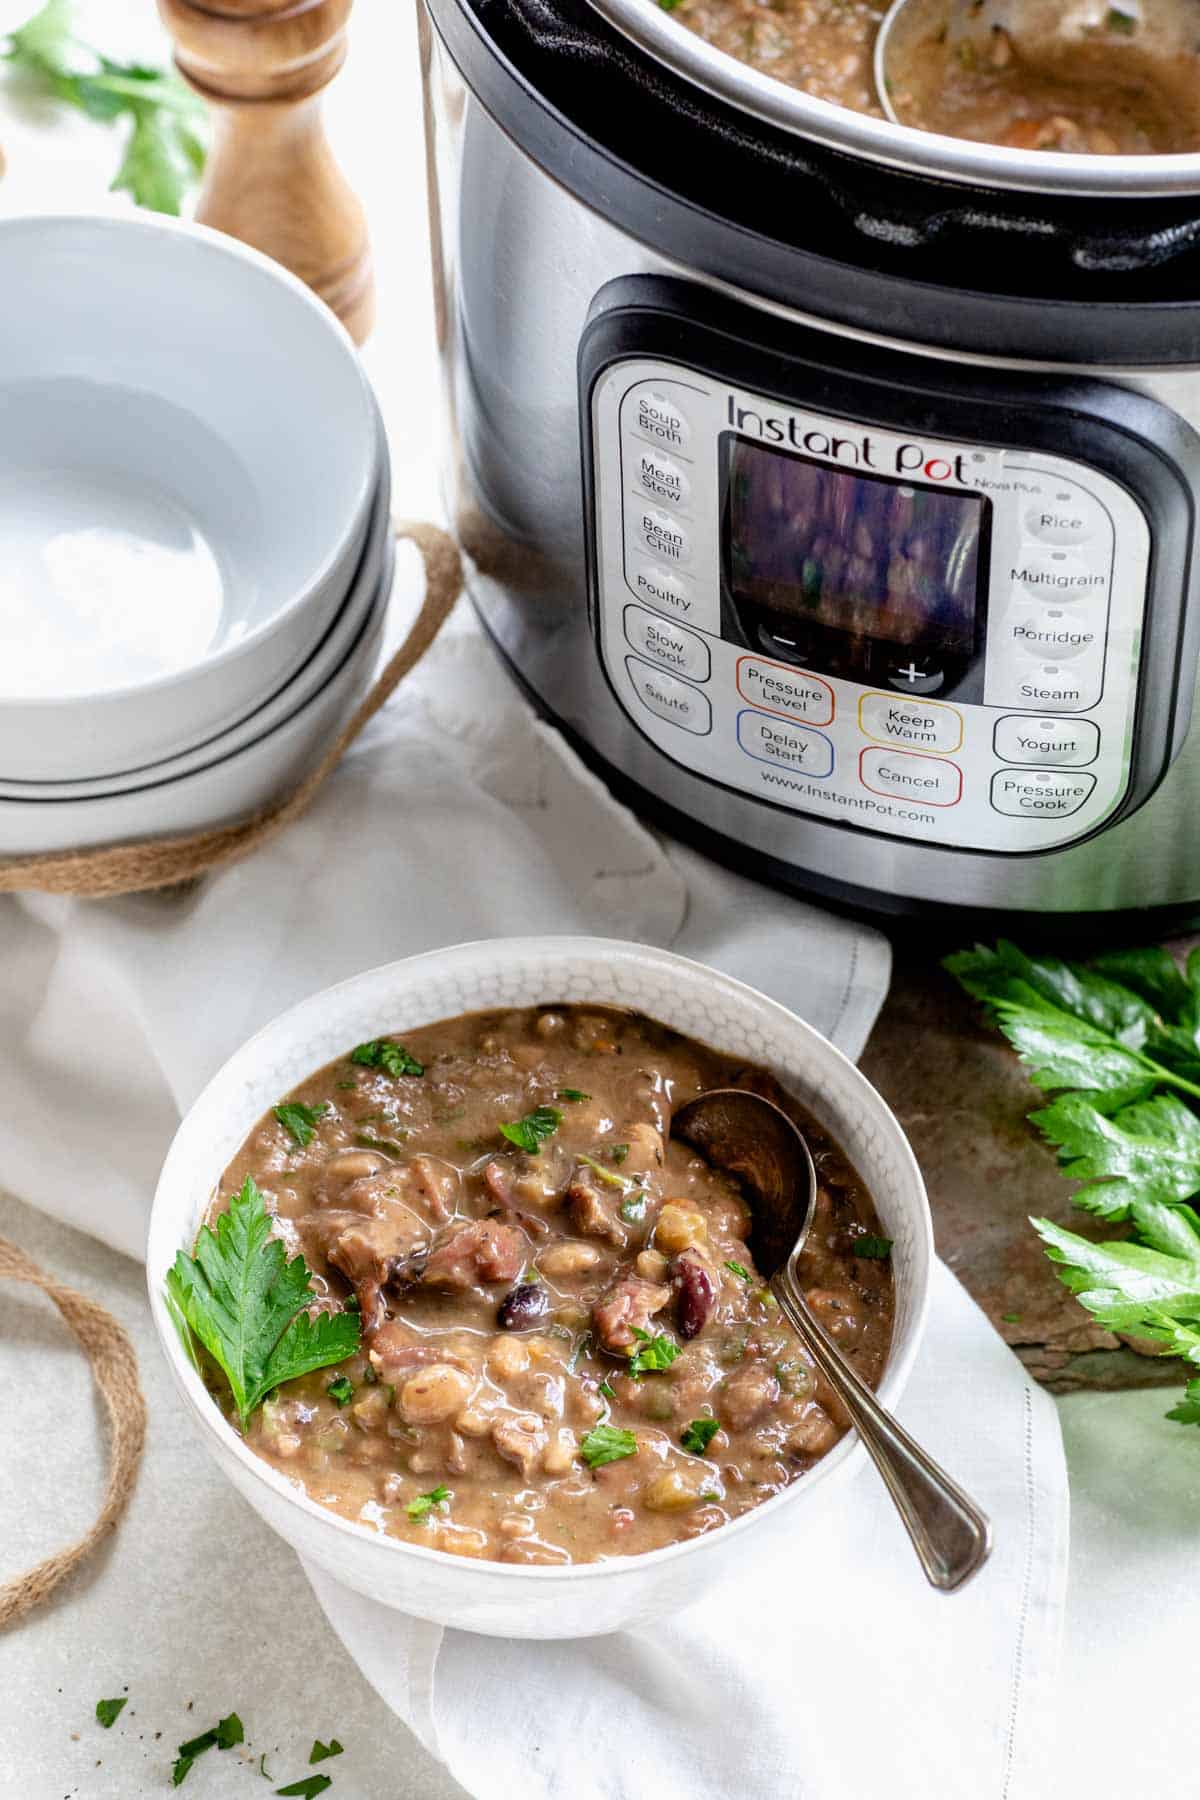 10 Things to NEVER do with your Instant Pot